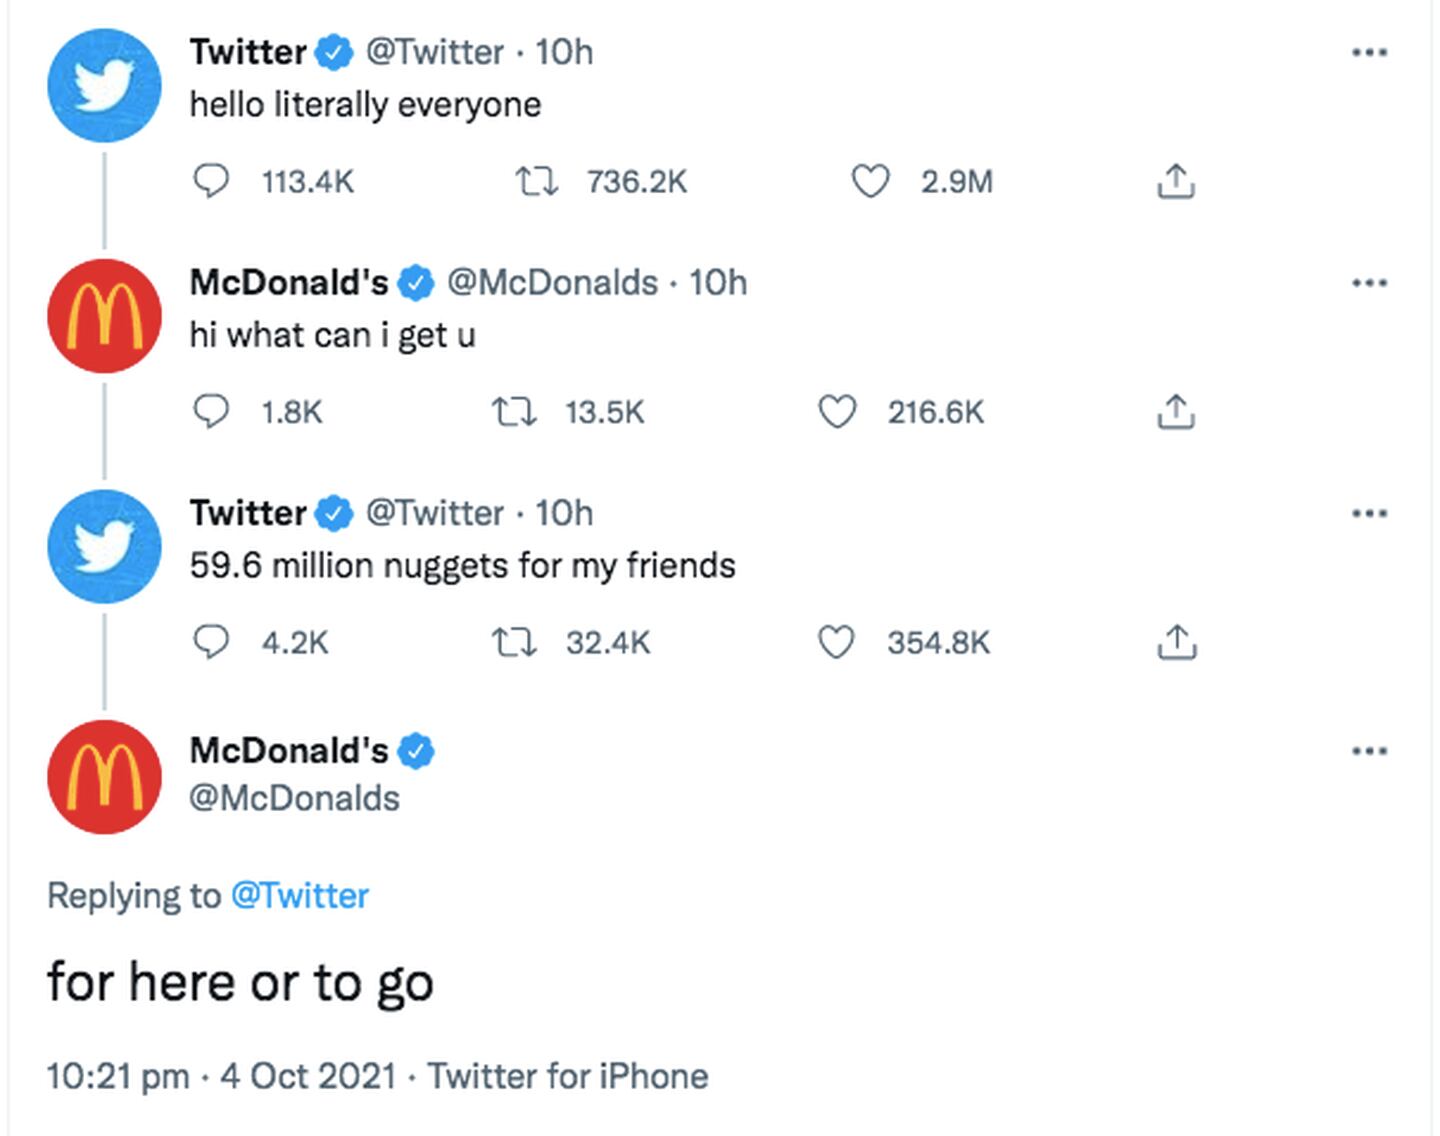 The official social media accounts for Twitter and McDonalds interact during the Facebook outage. Photo: Twitter